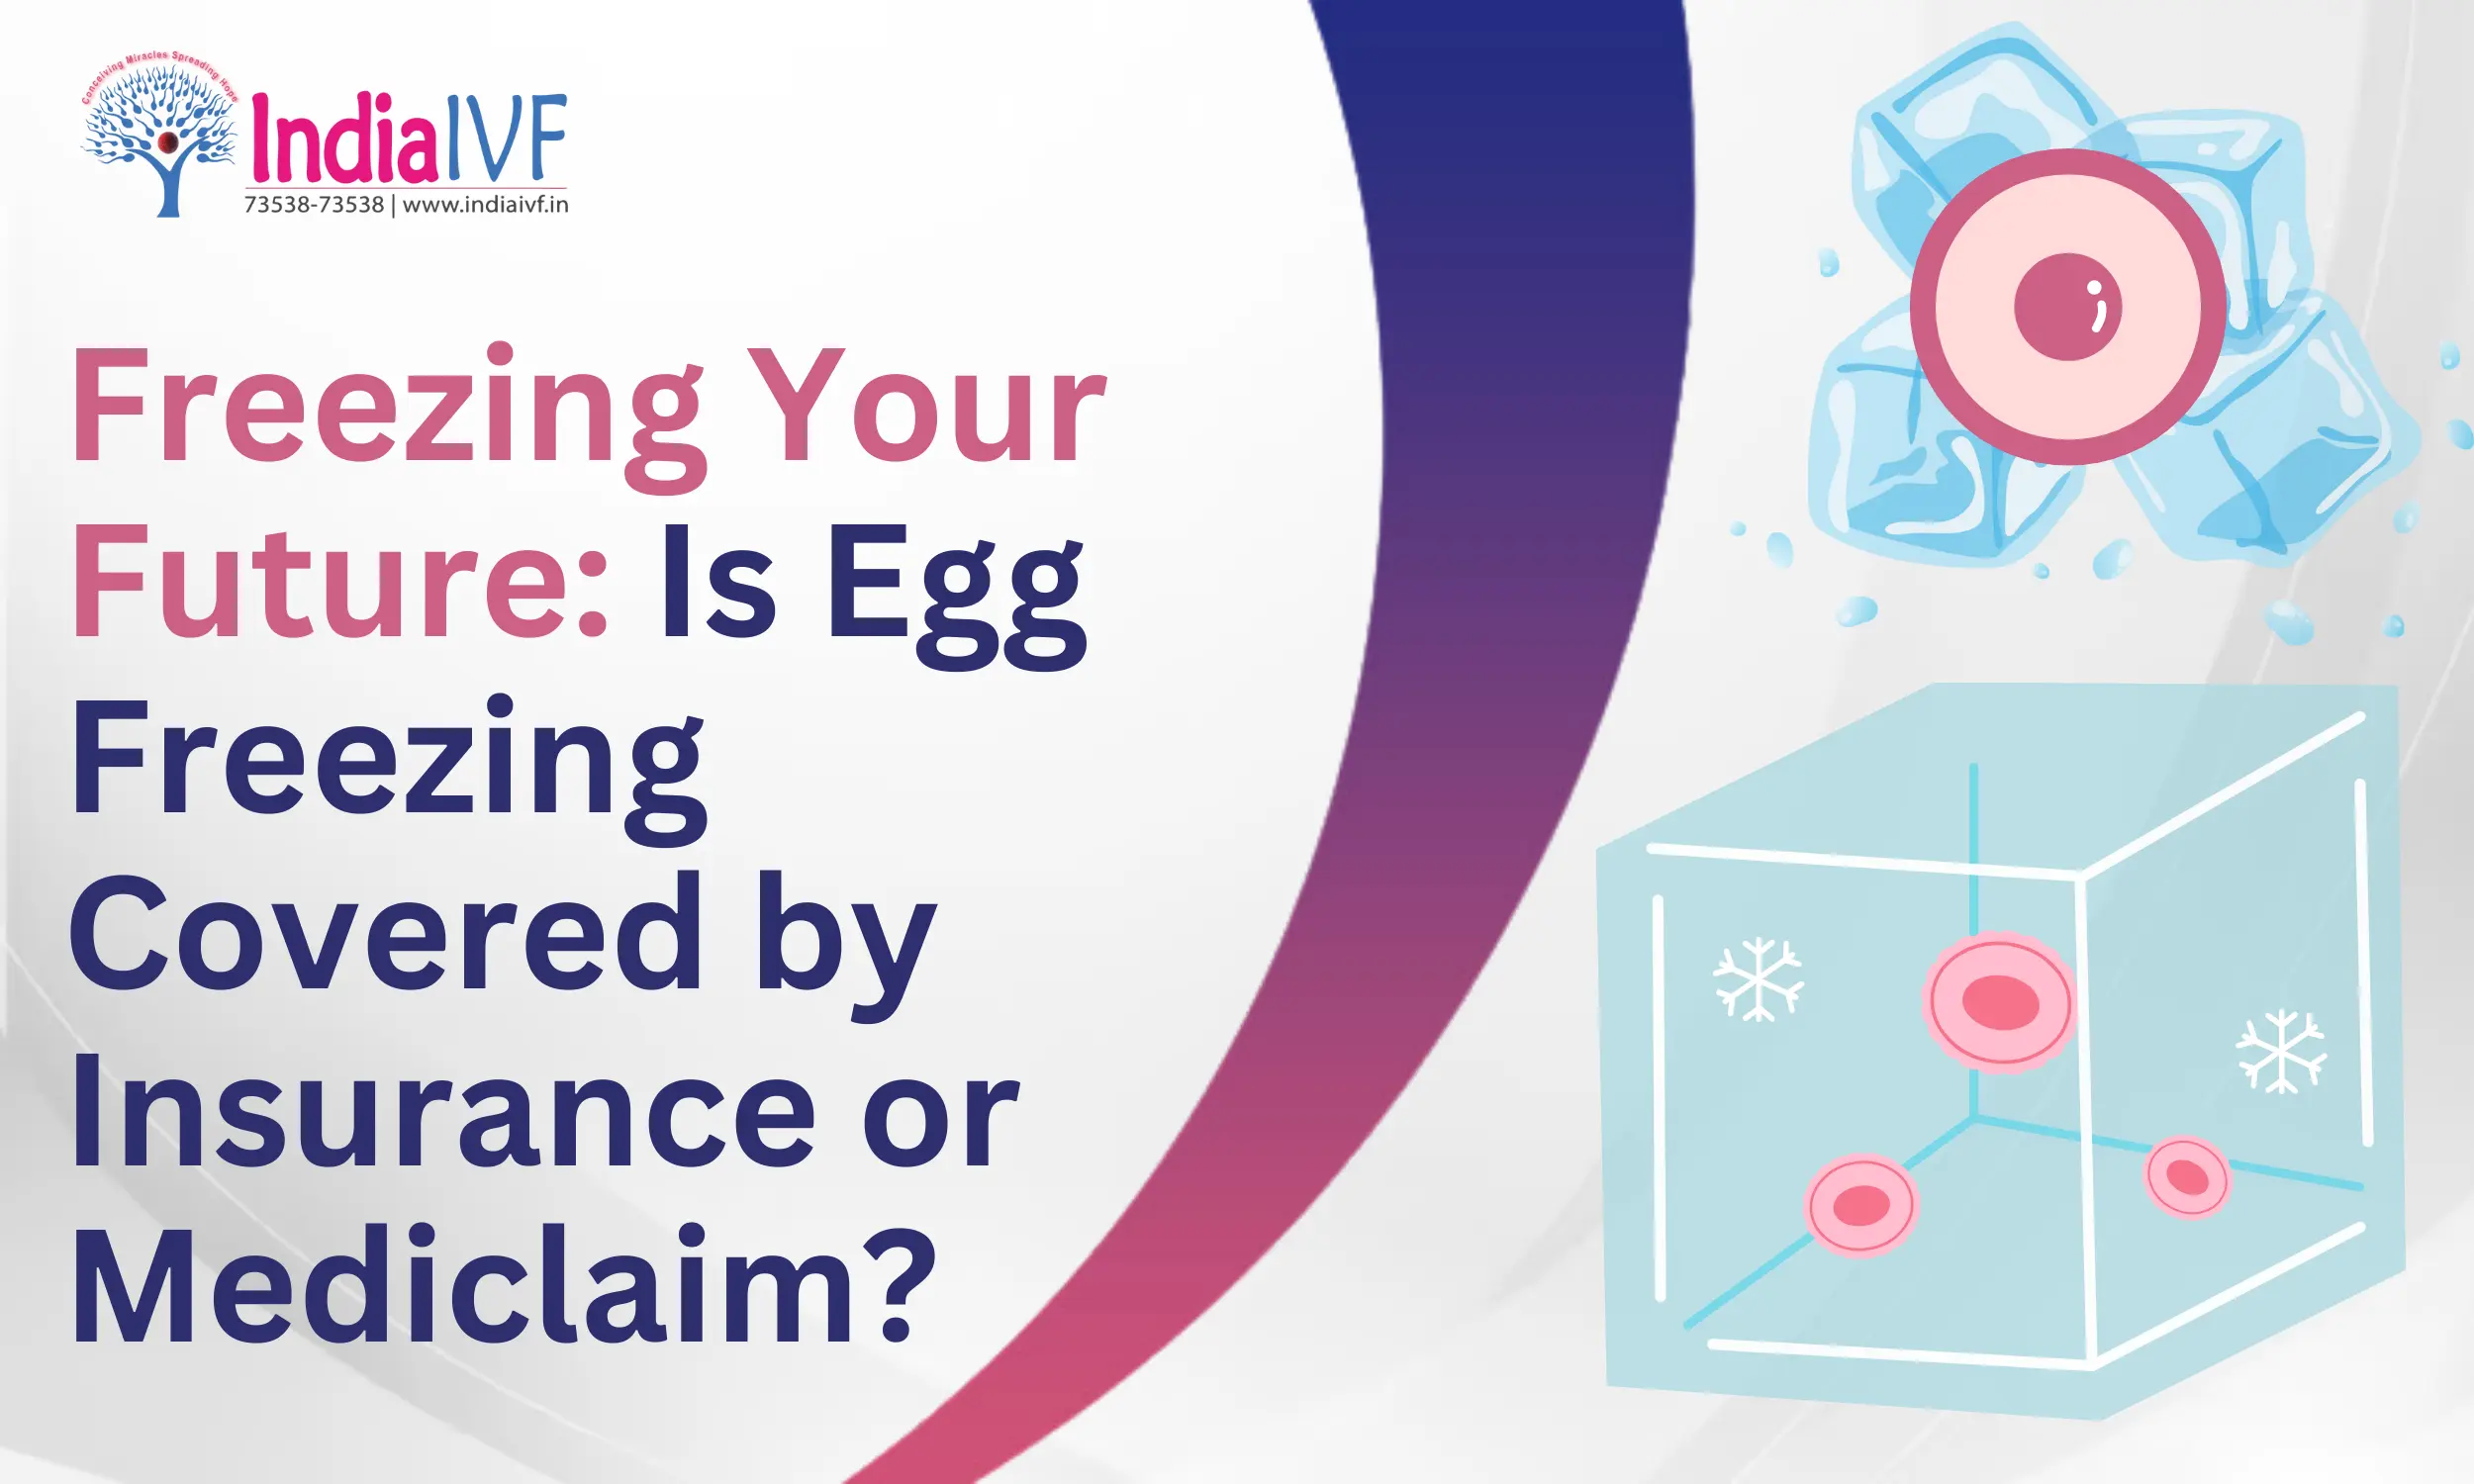 How Much is the Egg Freezing Cost in Delhi?